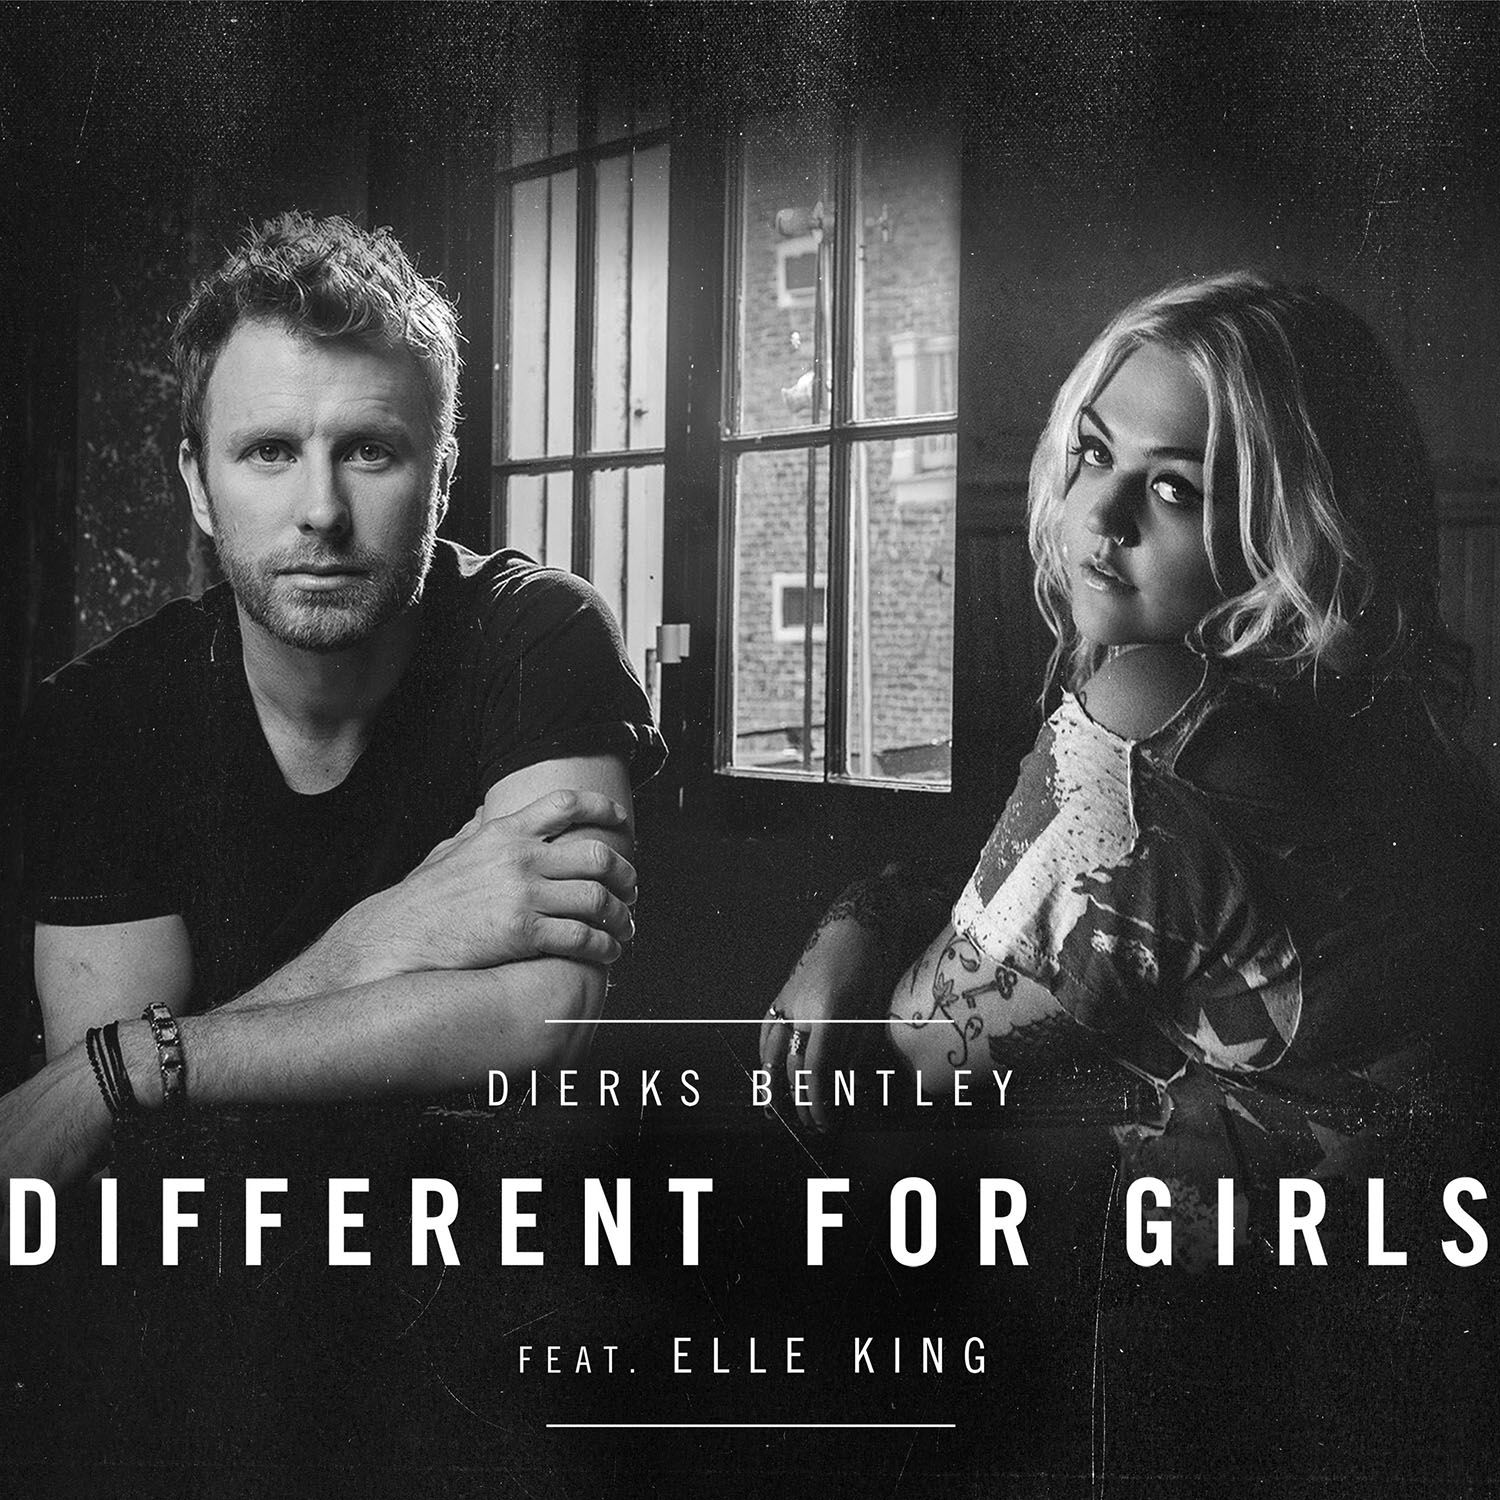 DIERKS BENTLEY TOPS THE CHARTS WITH “DIFFERENT FOR GIRLS” (FEAT. ELLE KING) AND CLAIMS 15TH CAREER NO. ONE HIT